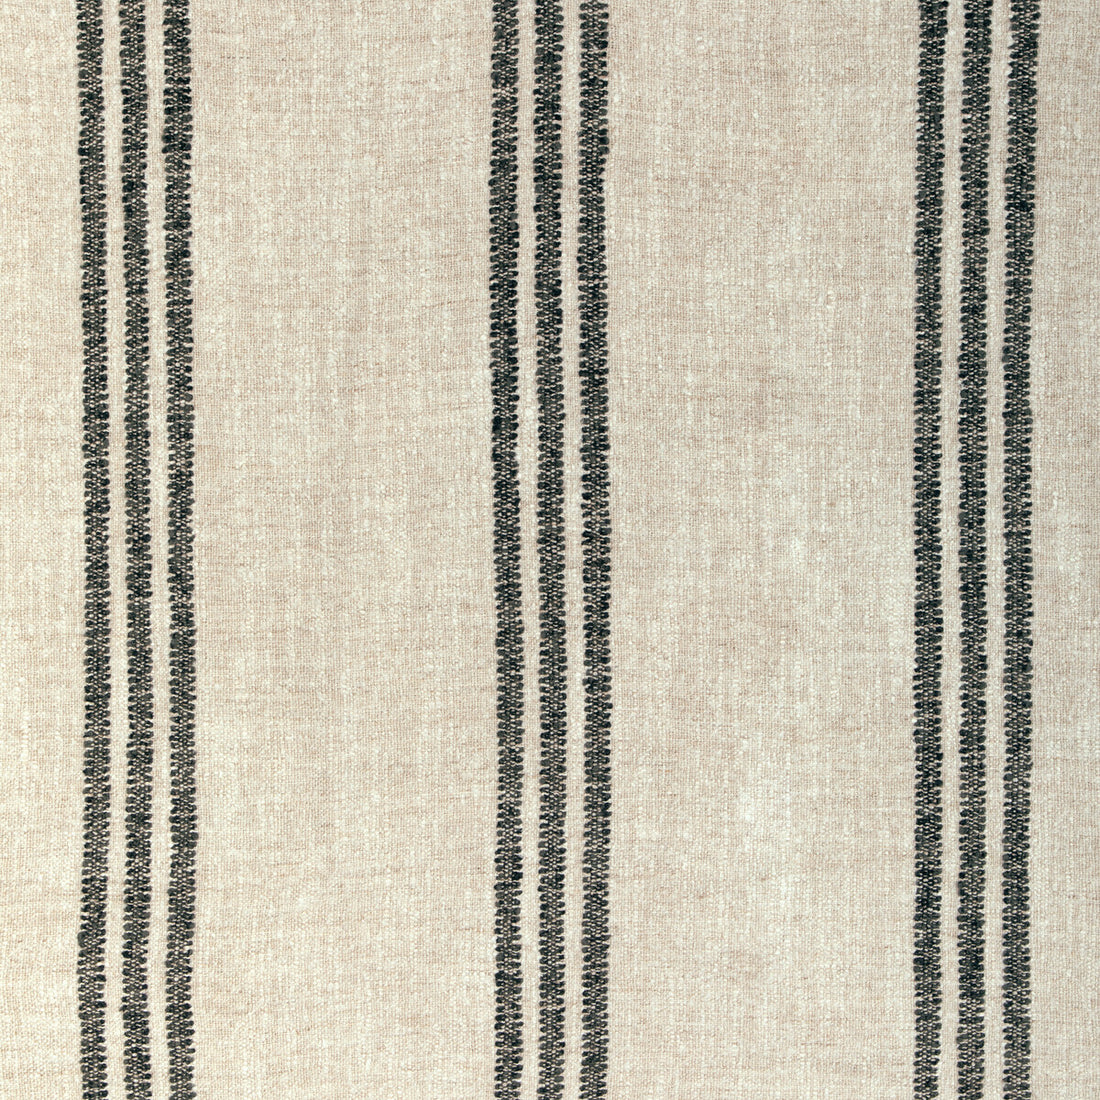 Karphi Stripe fabric in charcoal color - pattern 35860.816.0 - by Kravet Couture in the Atelier Weaves collection